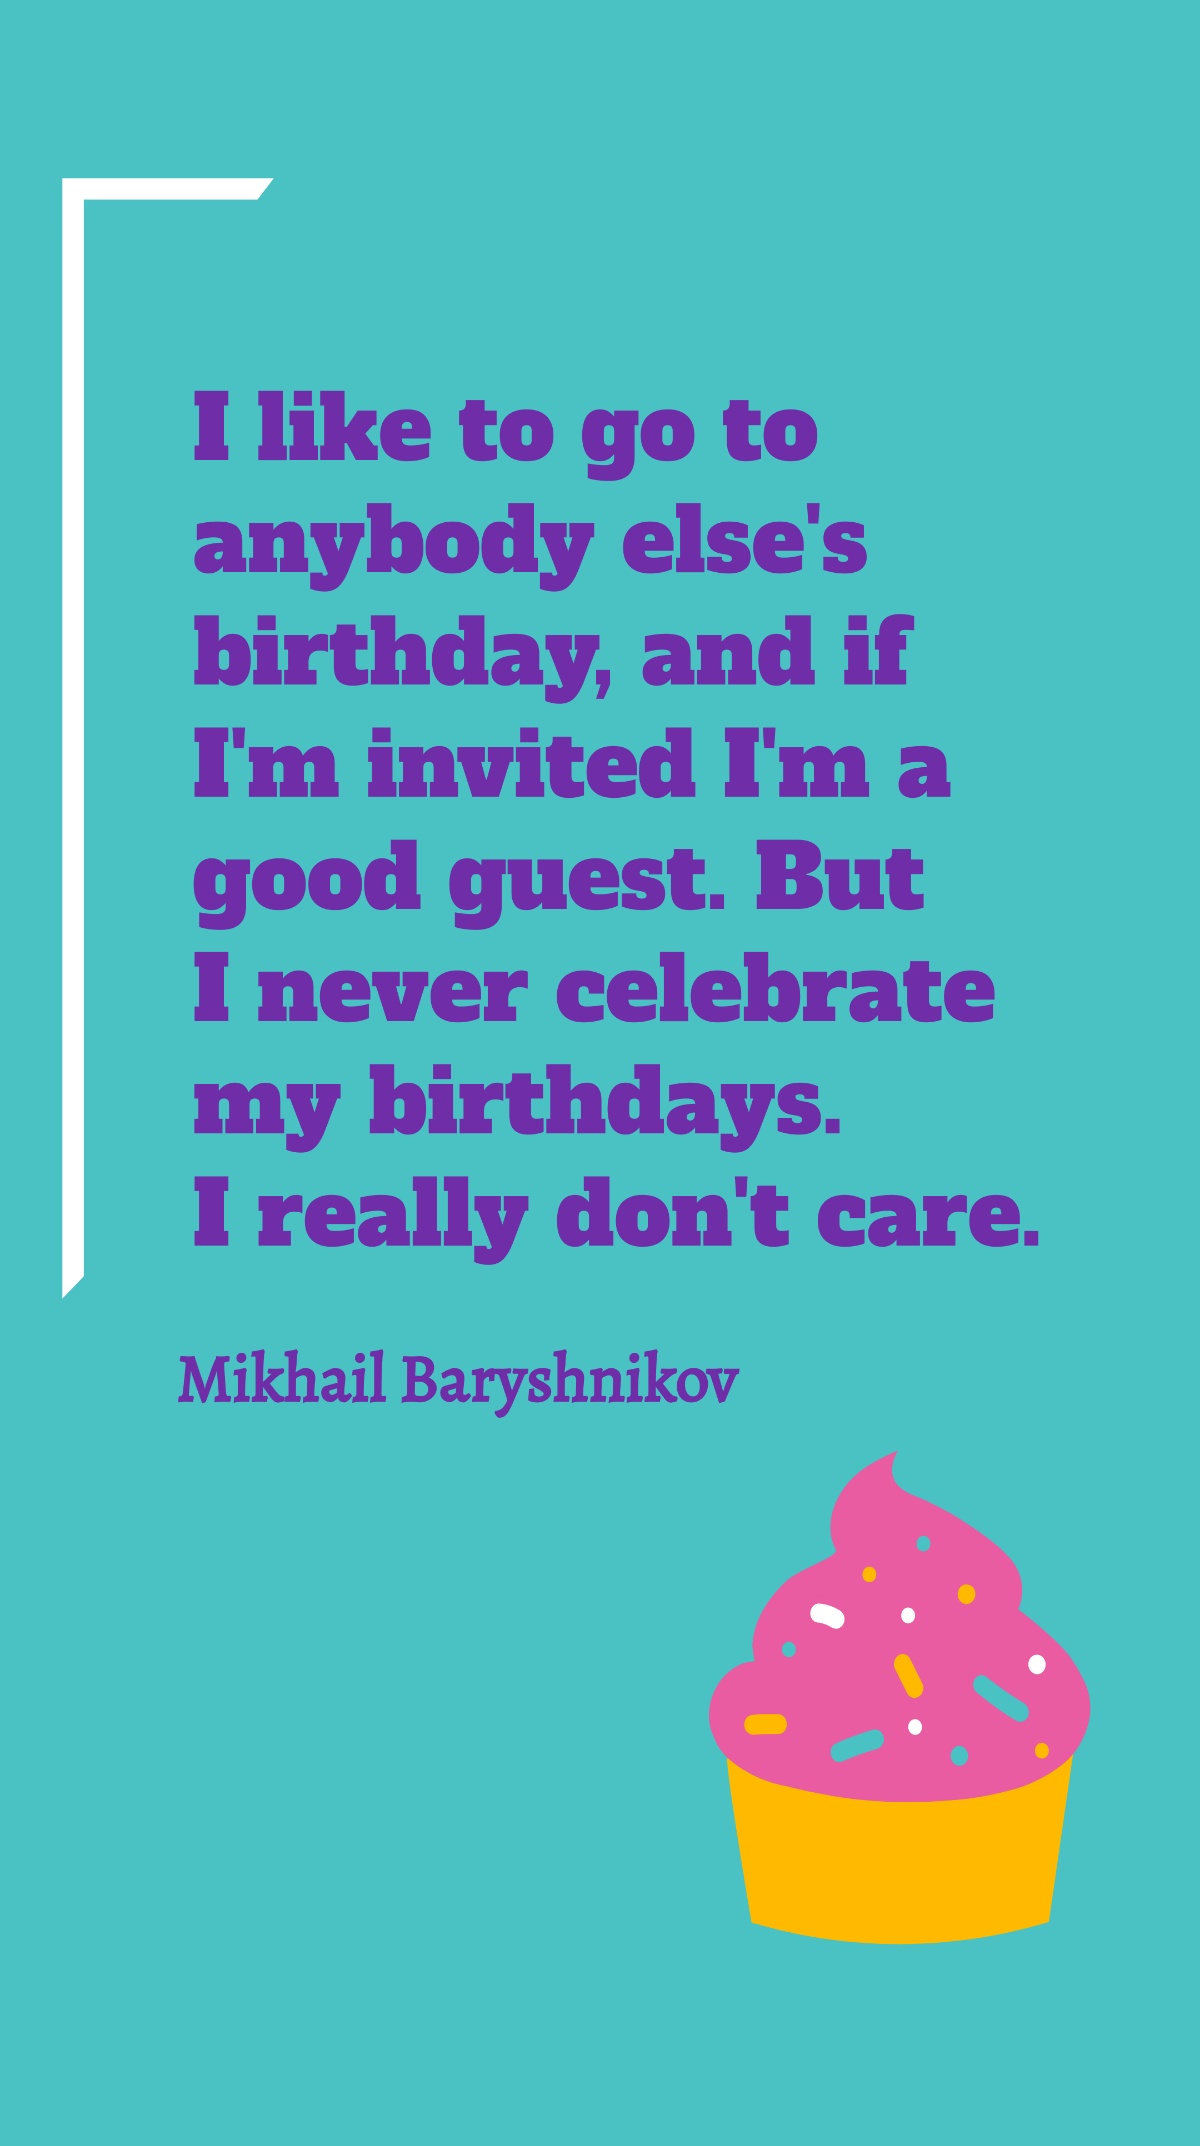 Mikhail Baryshnikov - I like to go to anybody else's birthday, and if I'm invited I'm a good guest. But I never celebrate my birthdays. I really don't care. Template